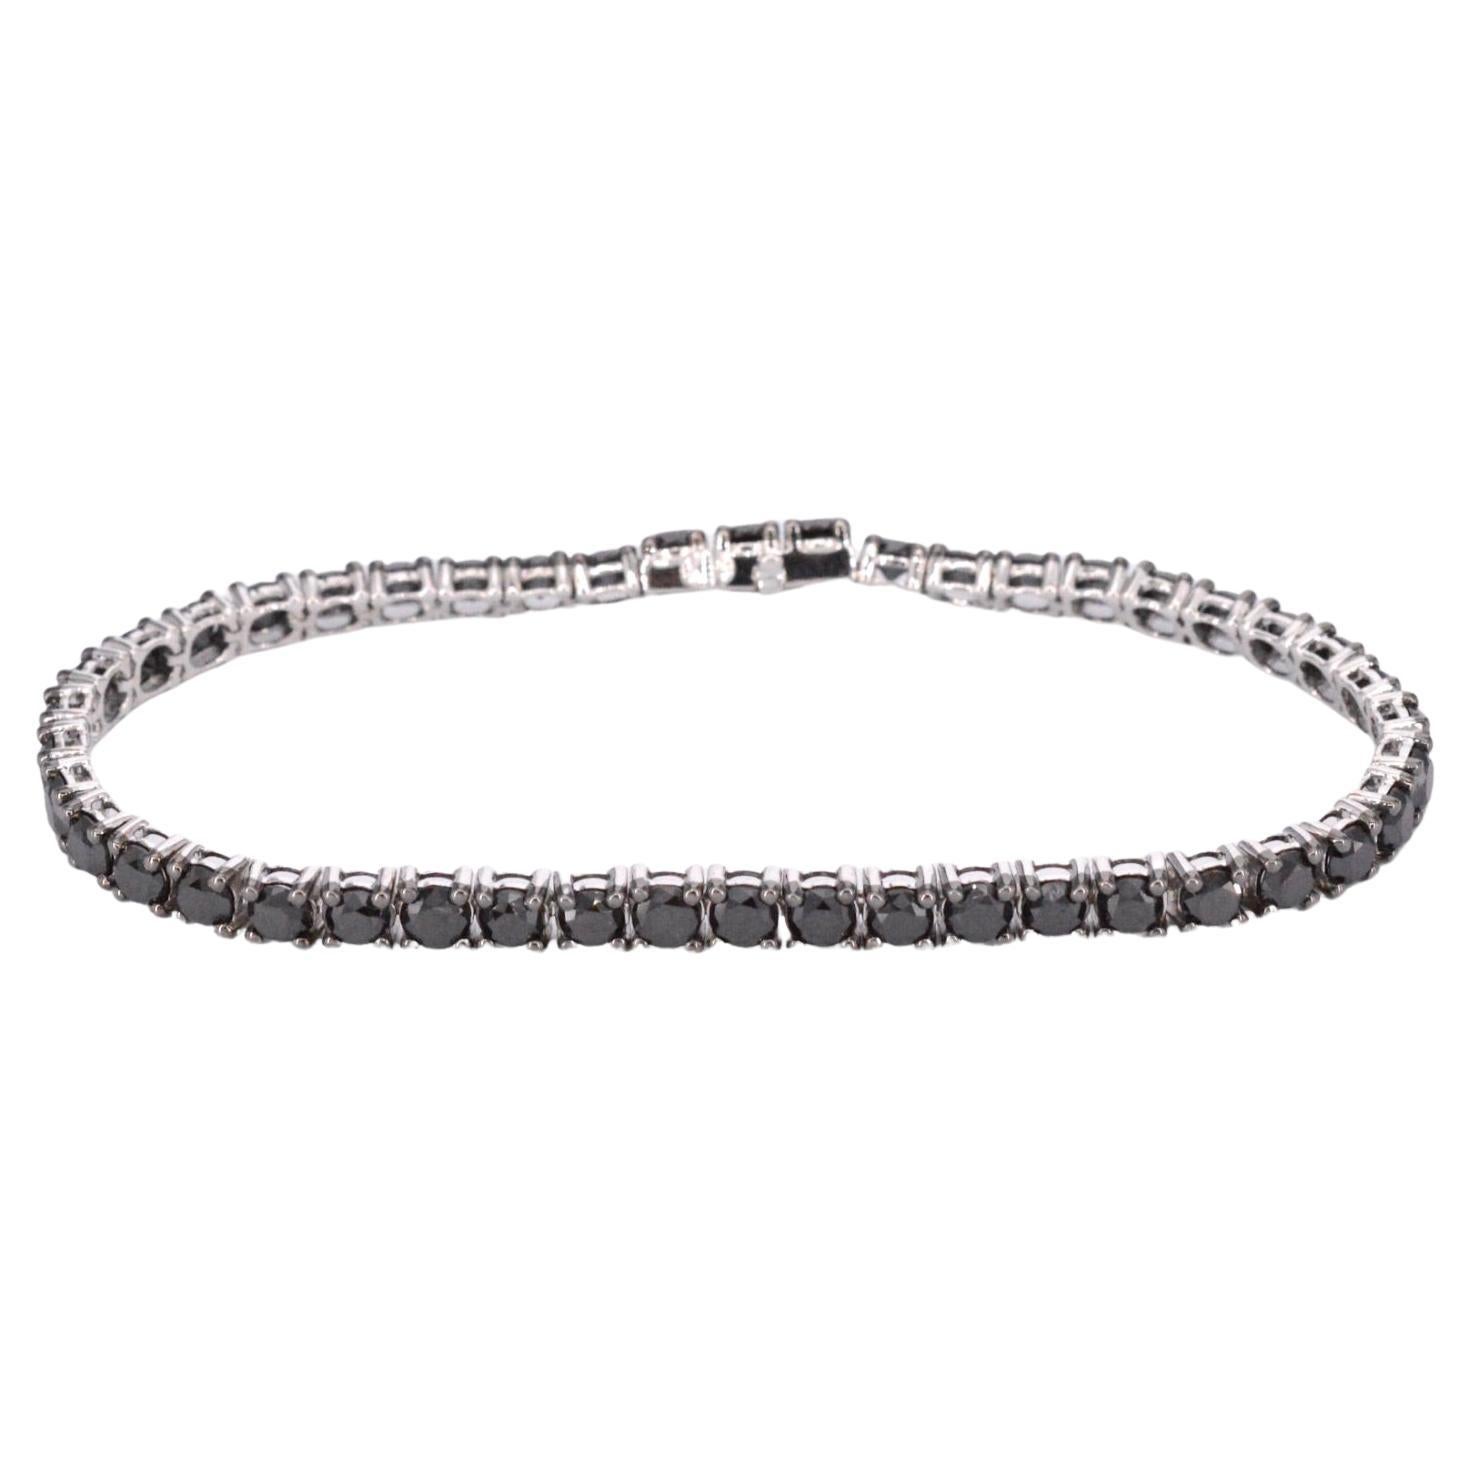 Embrace a touch of mystery with the white gold tennis bracelet set with black diamonds. This exquisite bracelet is crafted in white gold and adorned with enchanting black diamonds. The black diamonds add a sense of elegance and allure, contrasting